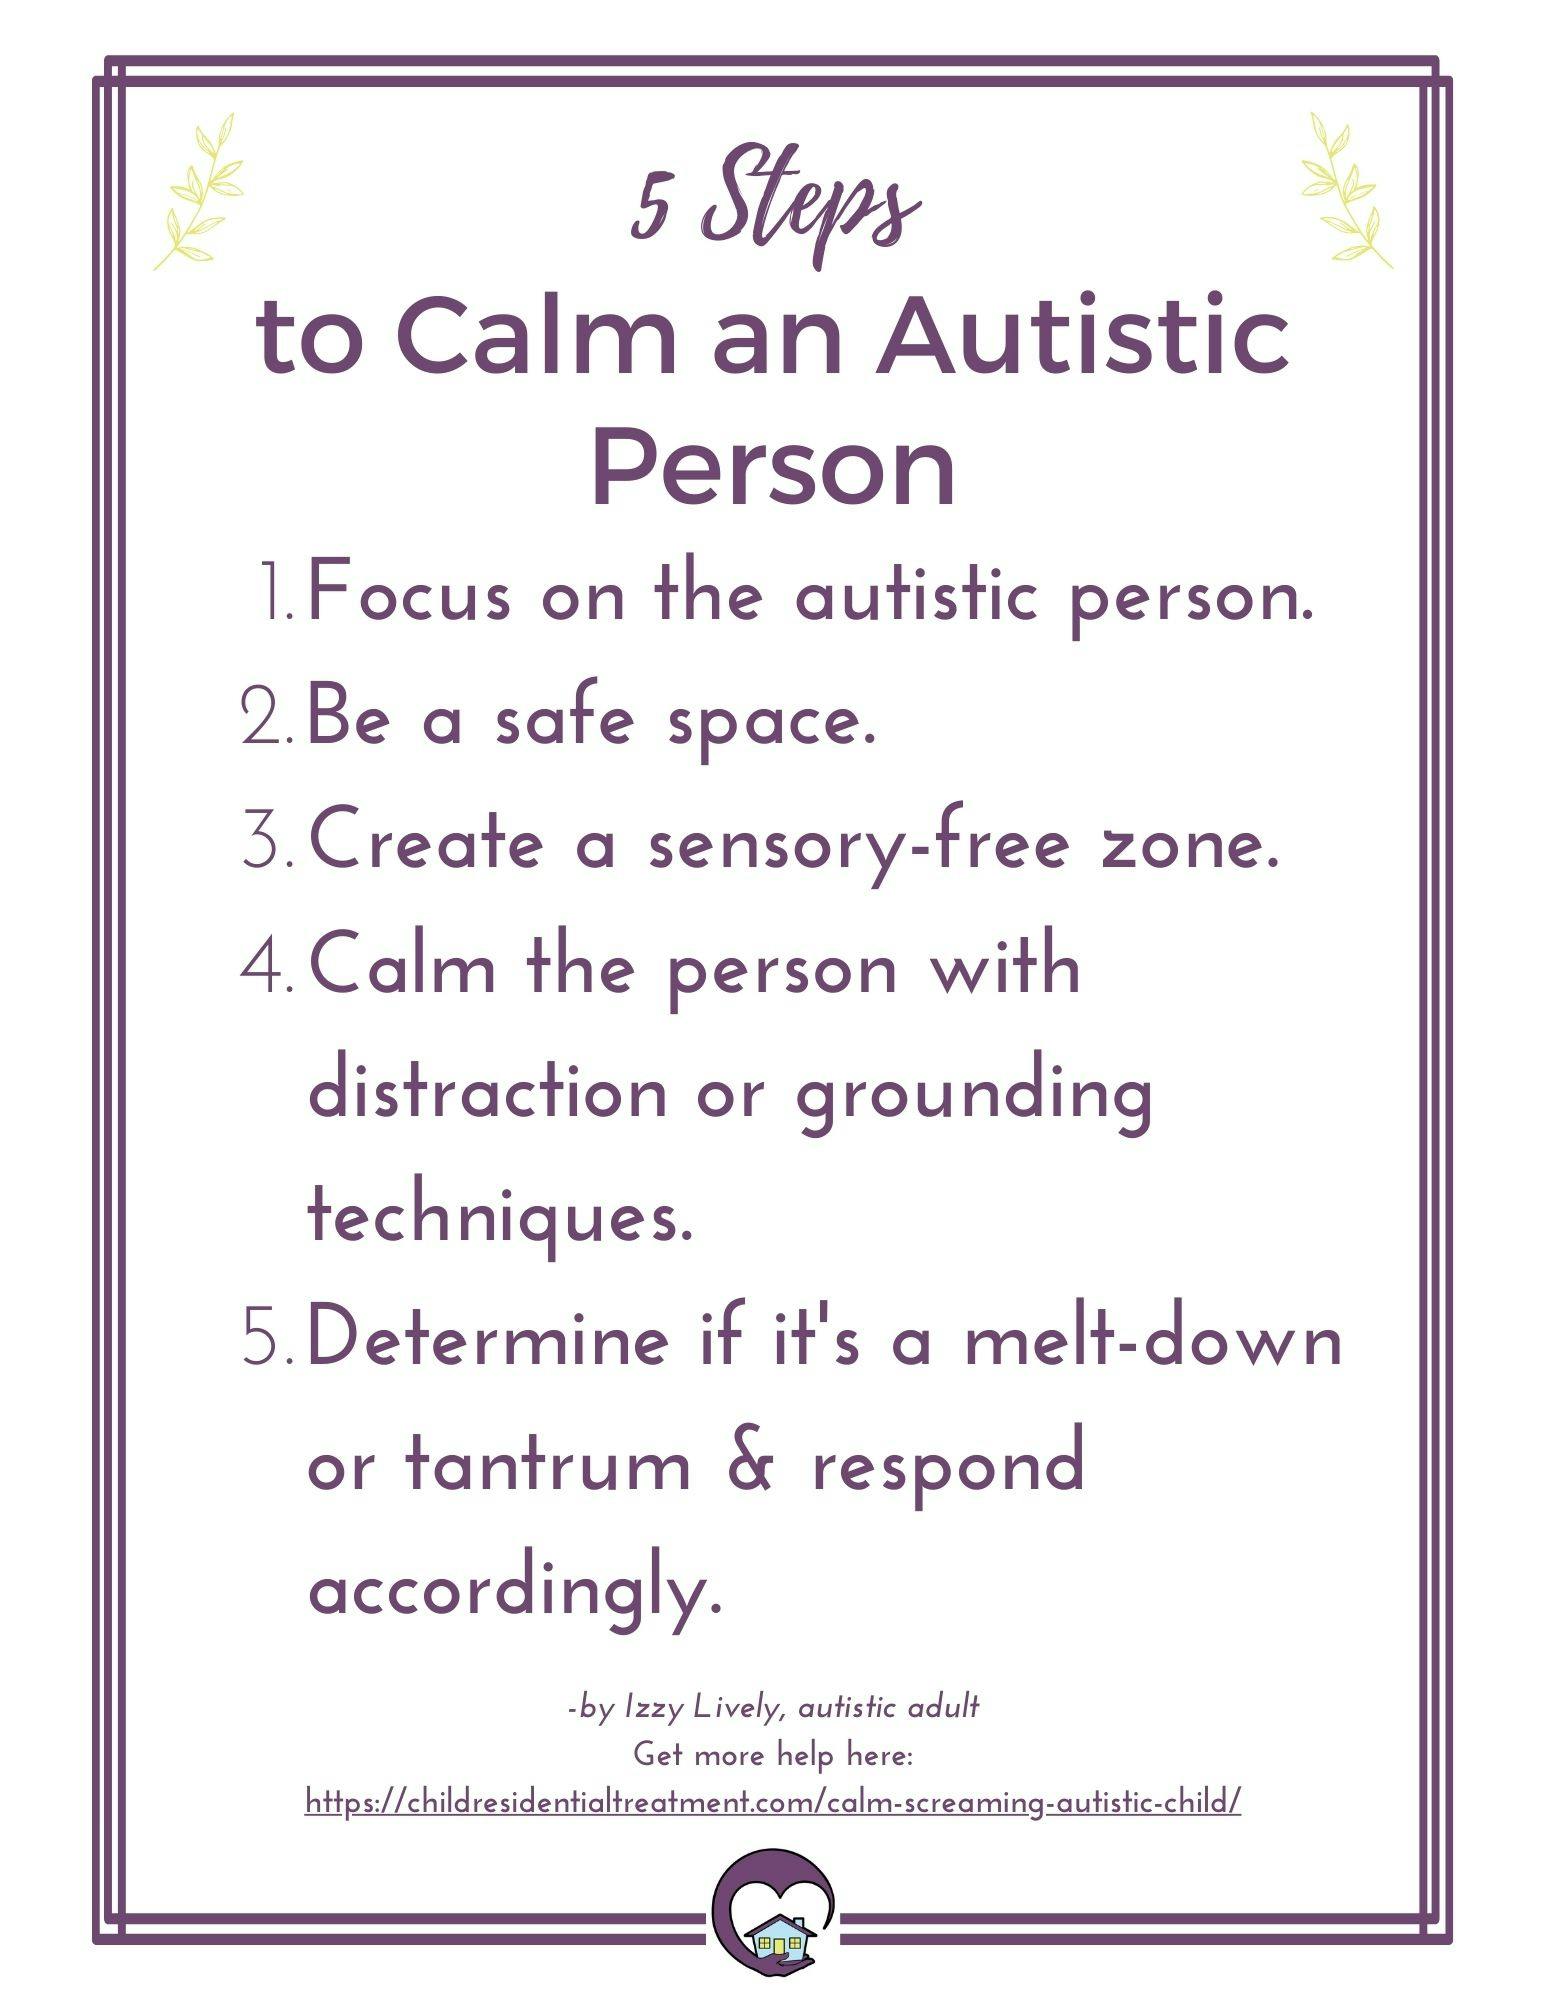 What not to do with an autistic child?